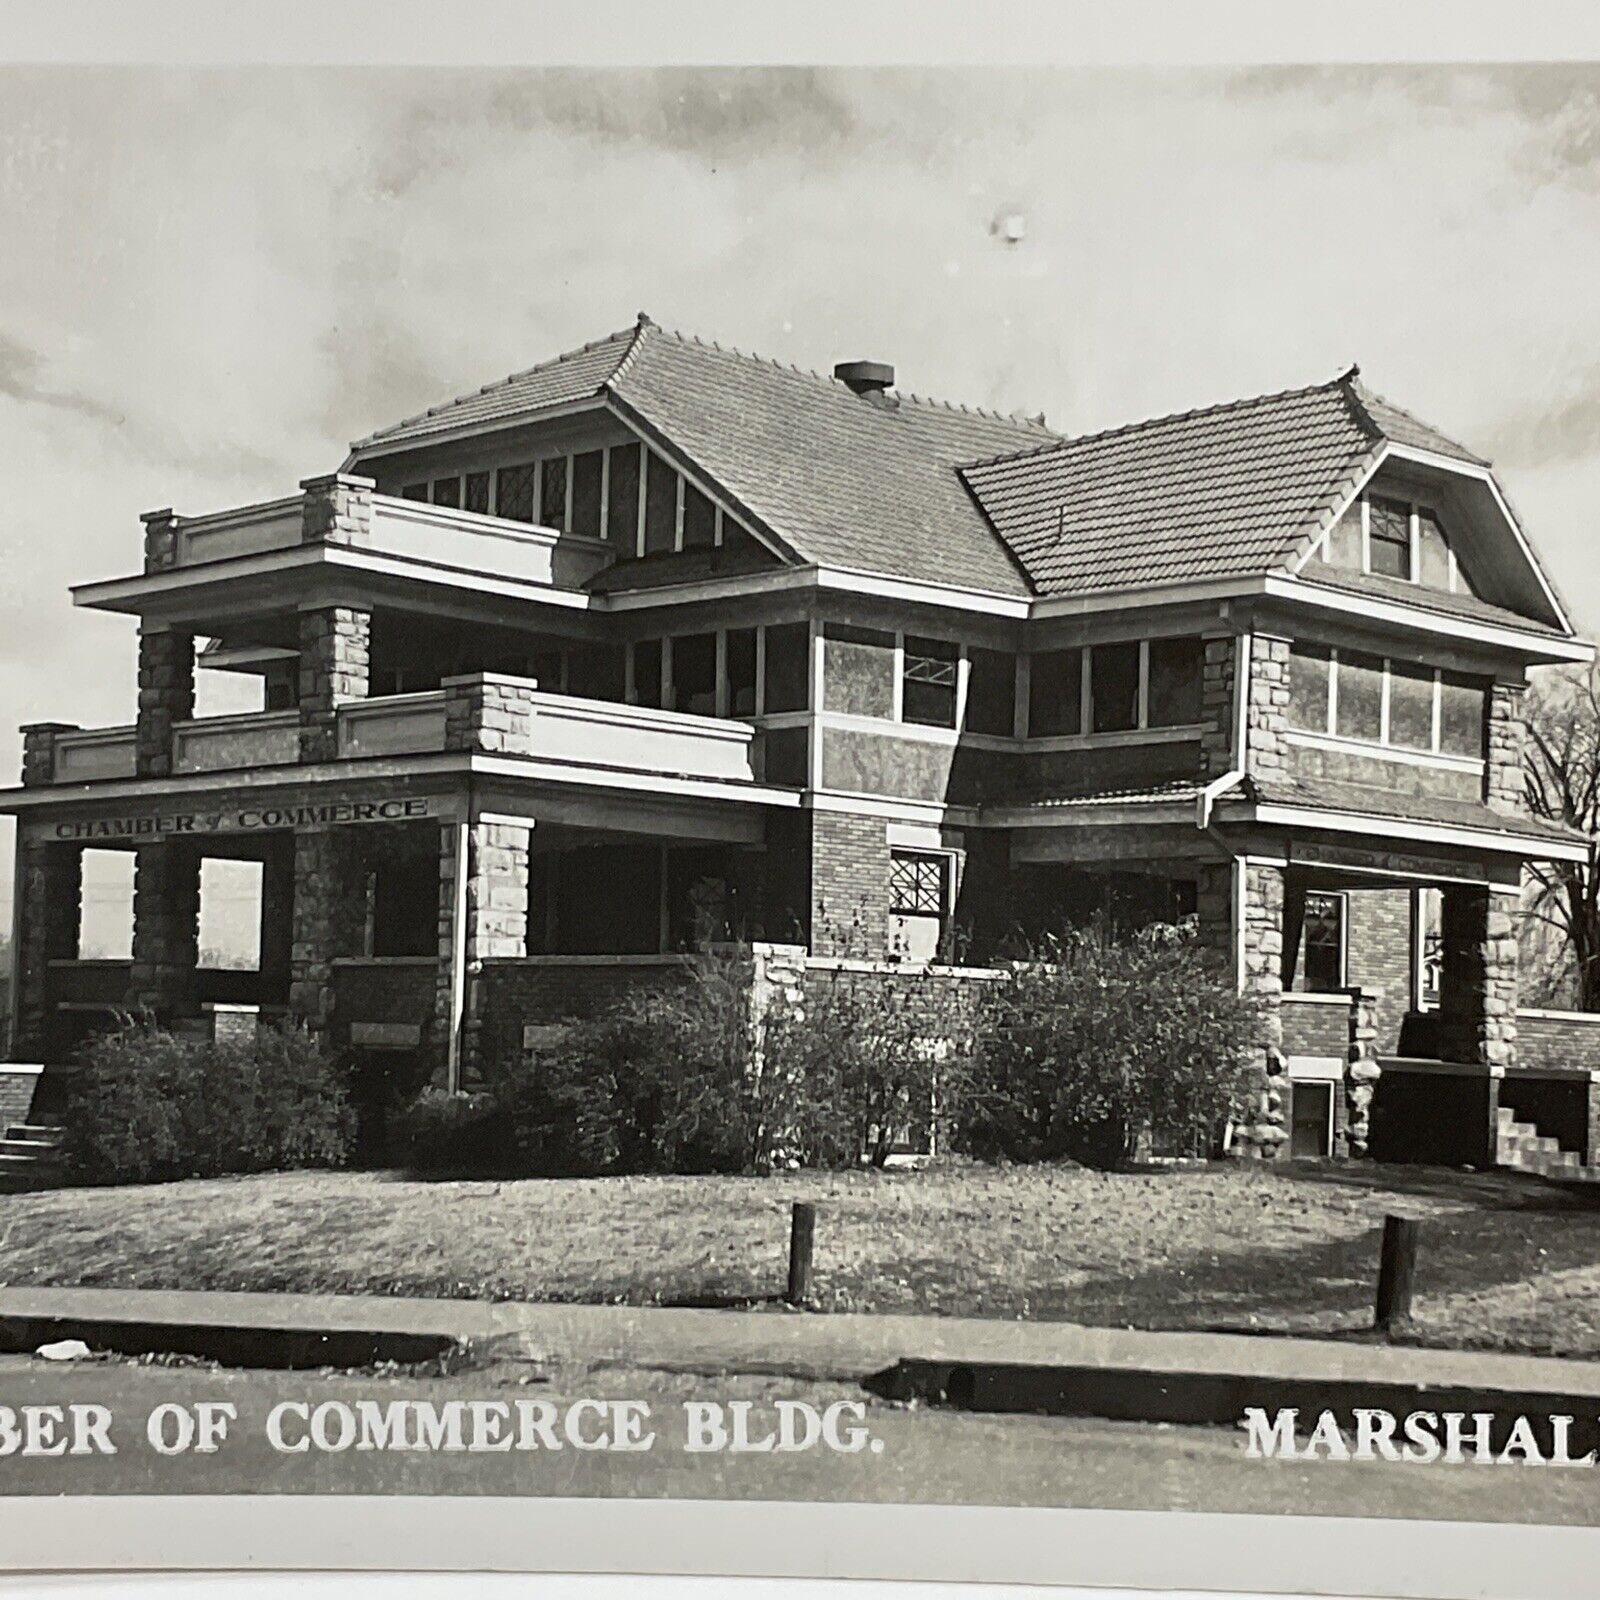 Early Marshall, Missouri Chamber of Commerce Building Real Photo Postcard RPPC